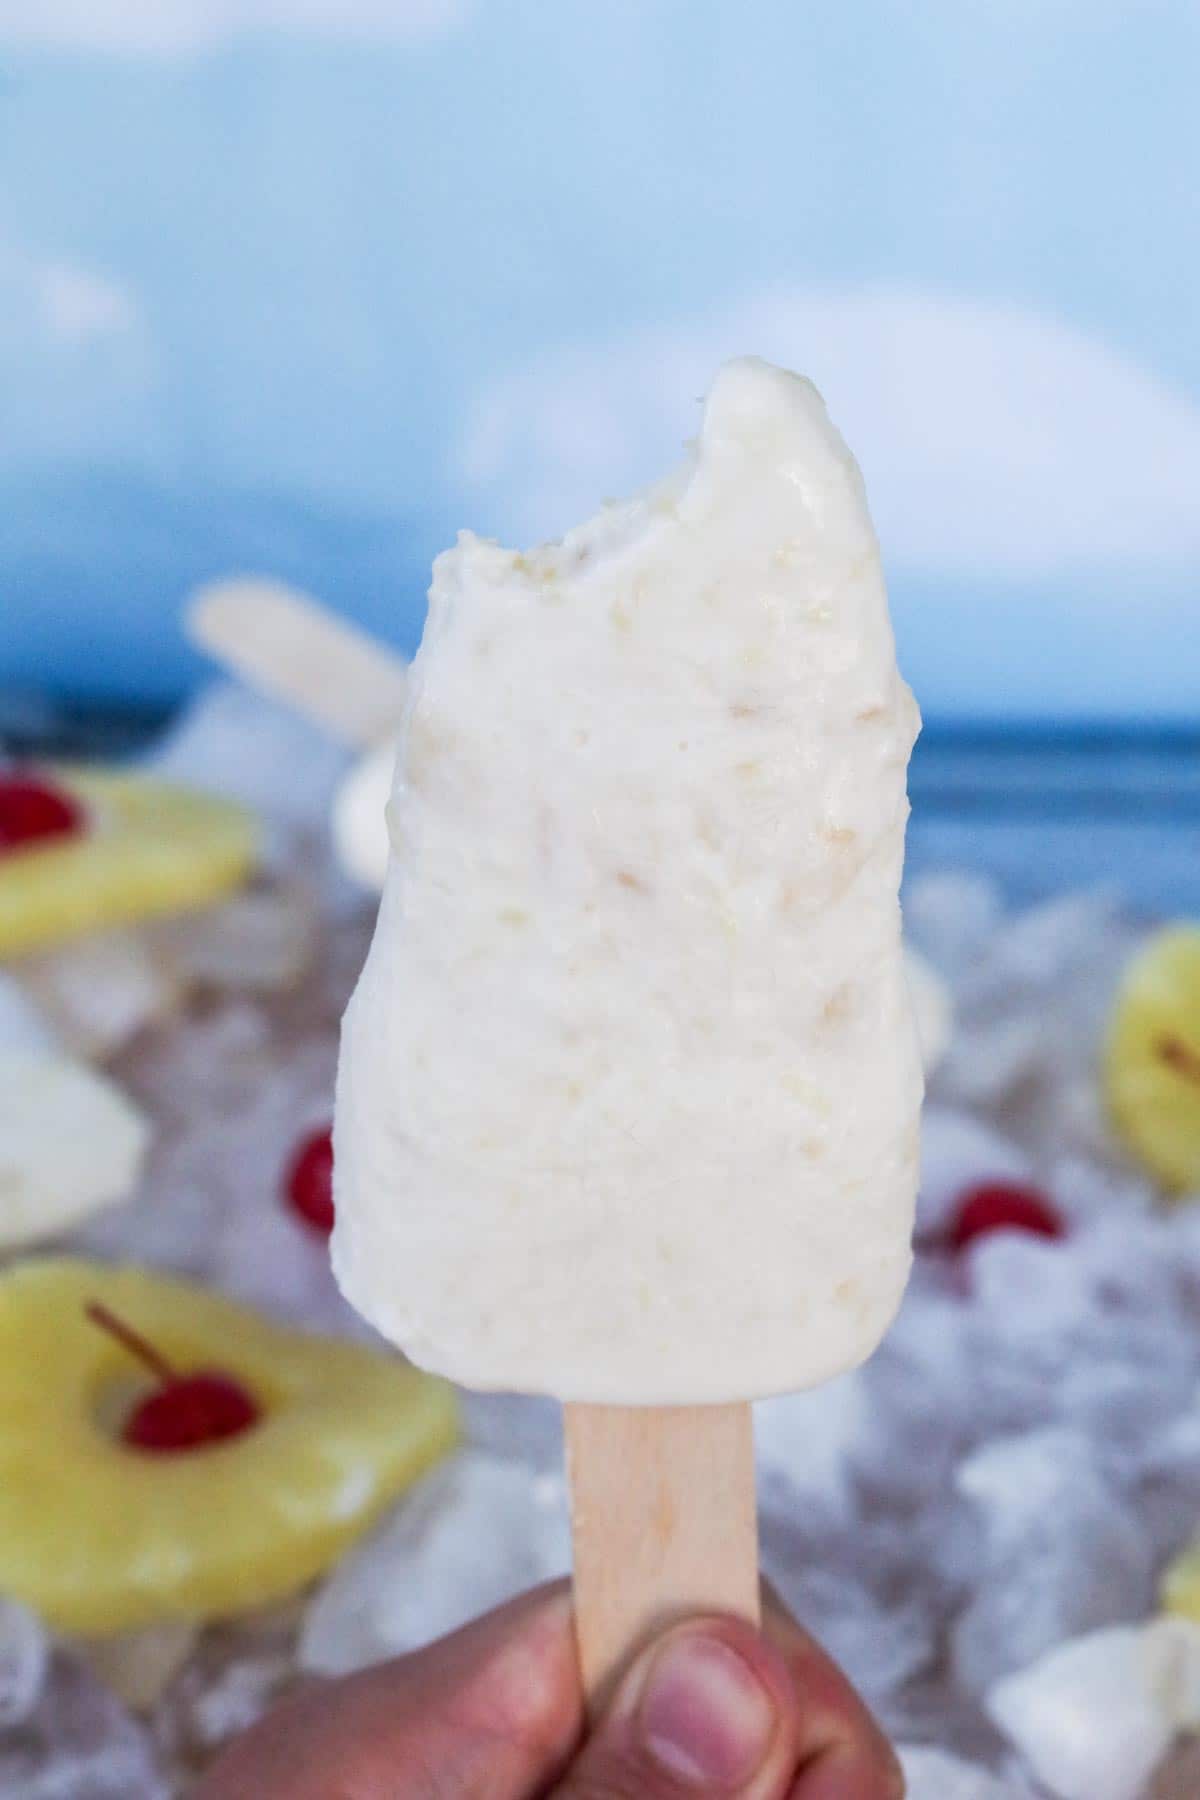 pina colada popsicle, with a bite taken out of it, being held up by hand and ice, pineapple rings, cherries and more popsicles in the background